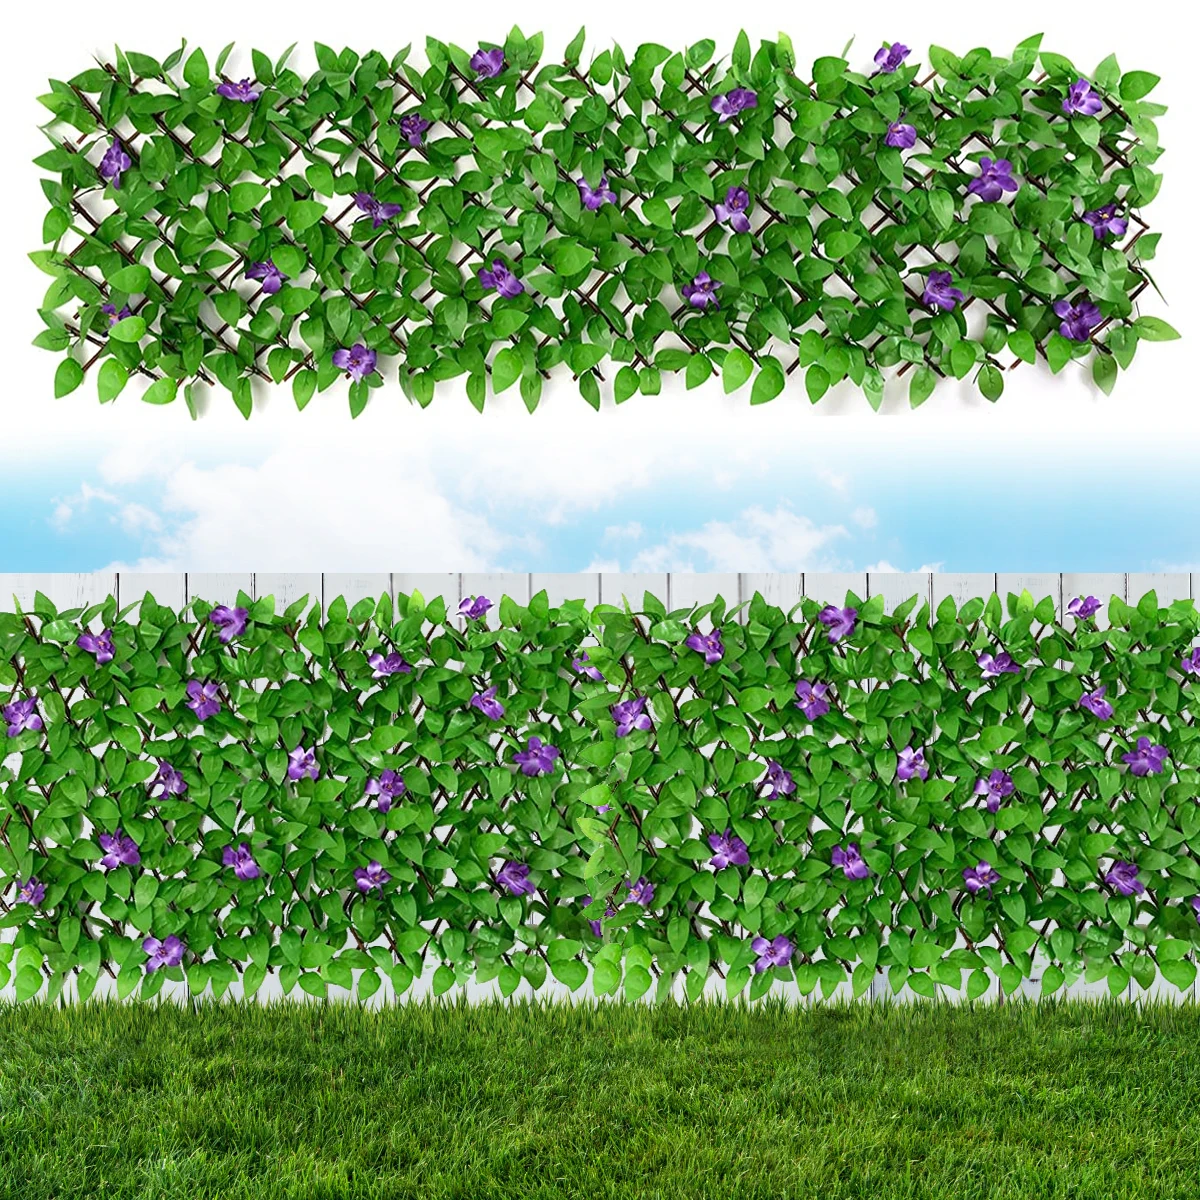 

Expandable Fence Privacy Screen 40x200cm Artificial Hedges Privacy Fences Stretchable Fake Ivy Leaf Fencing Decoration for